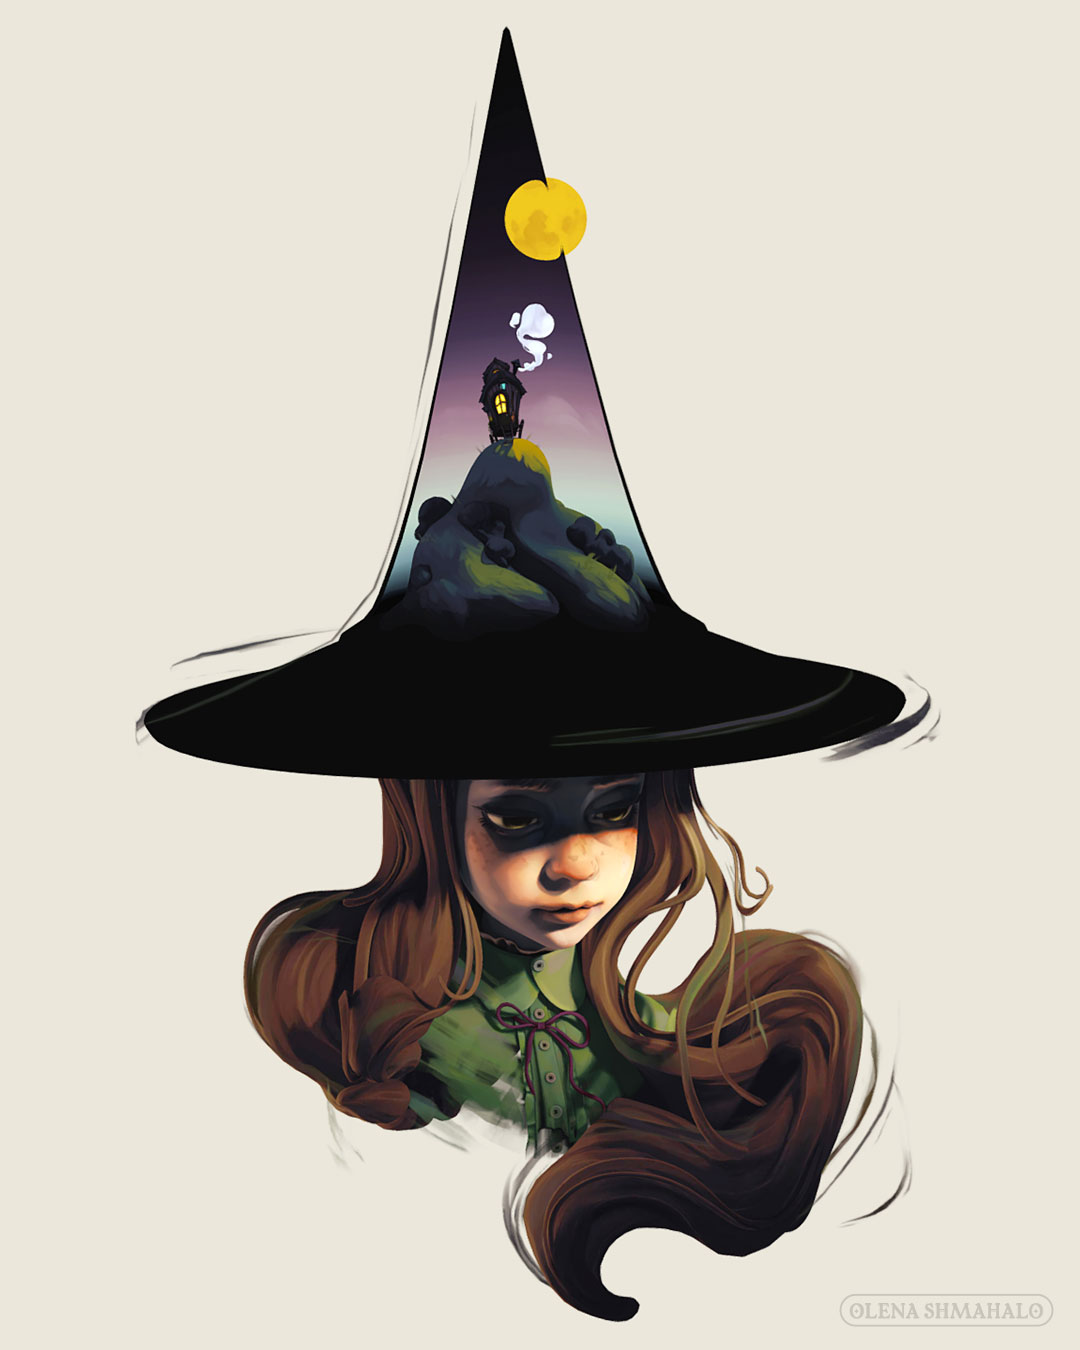 Painted 3D sculpture of a girl with brown hair wearing a witch hat. The top of the hat is a cutaway diorama of a landscape: a shepherd's hut on a hill.